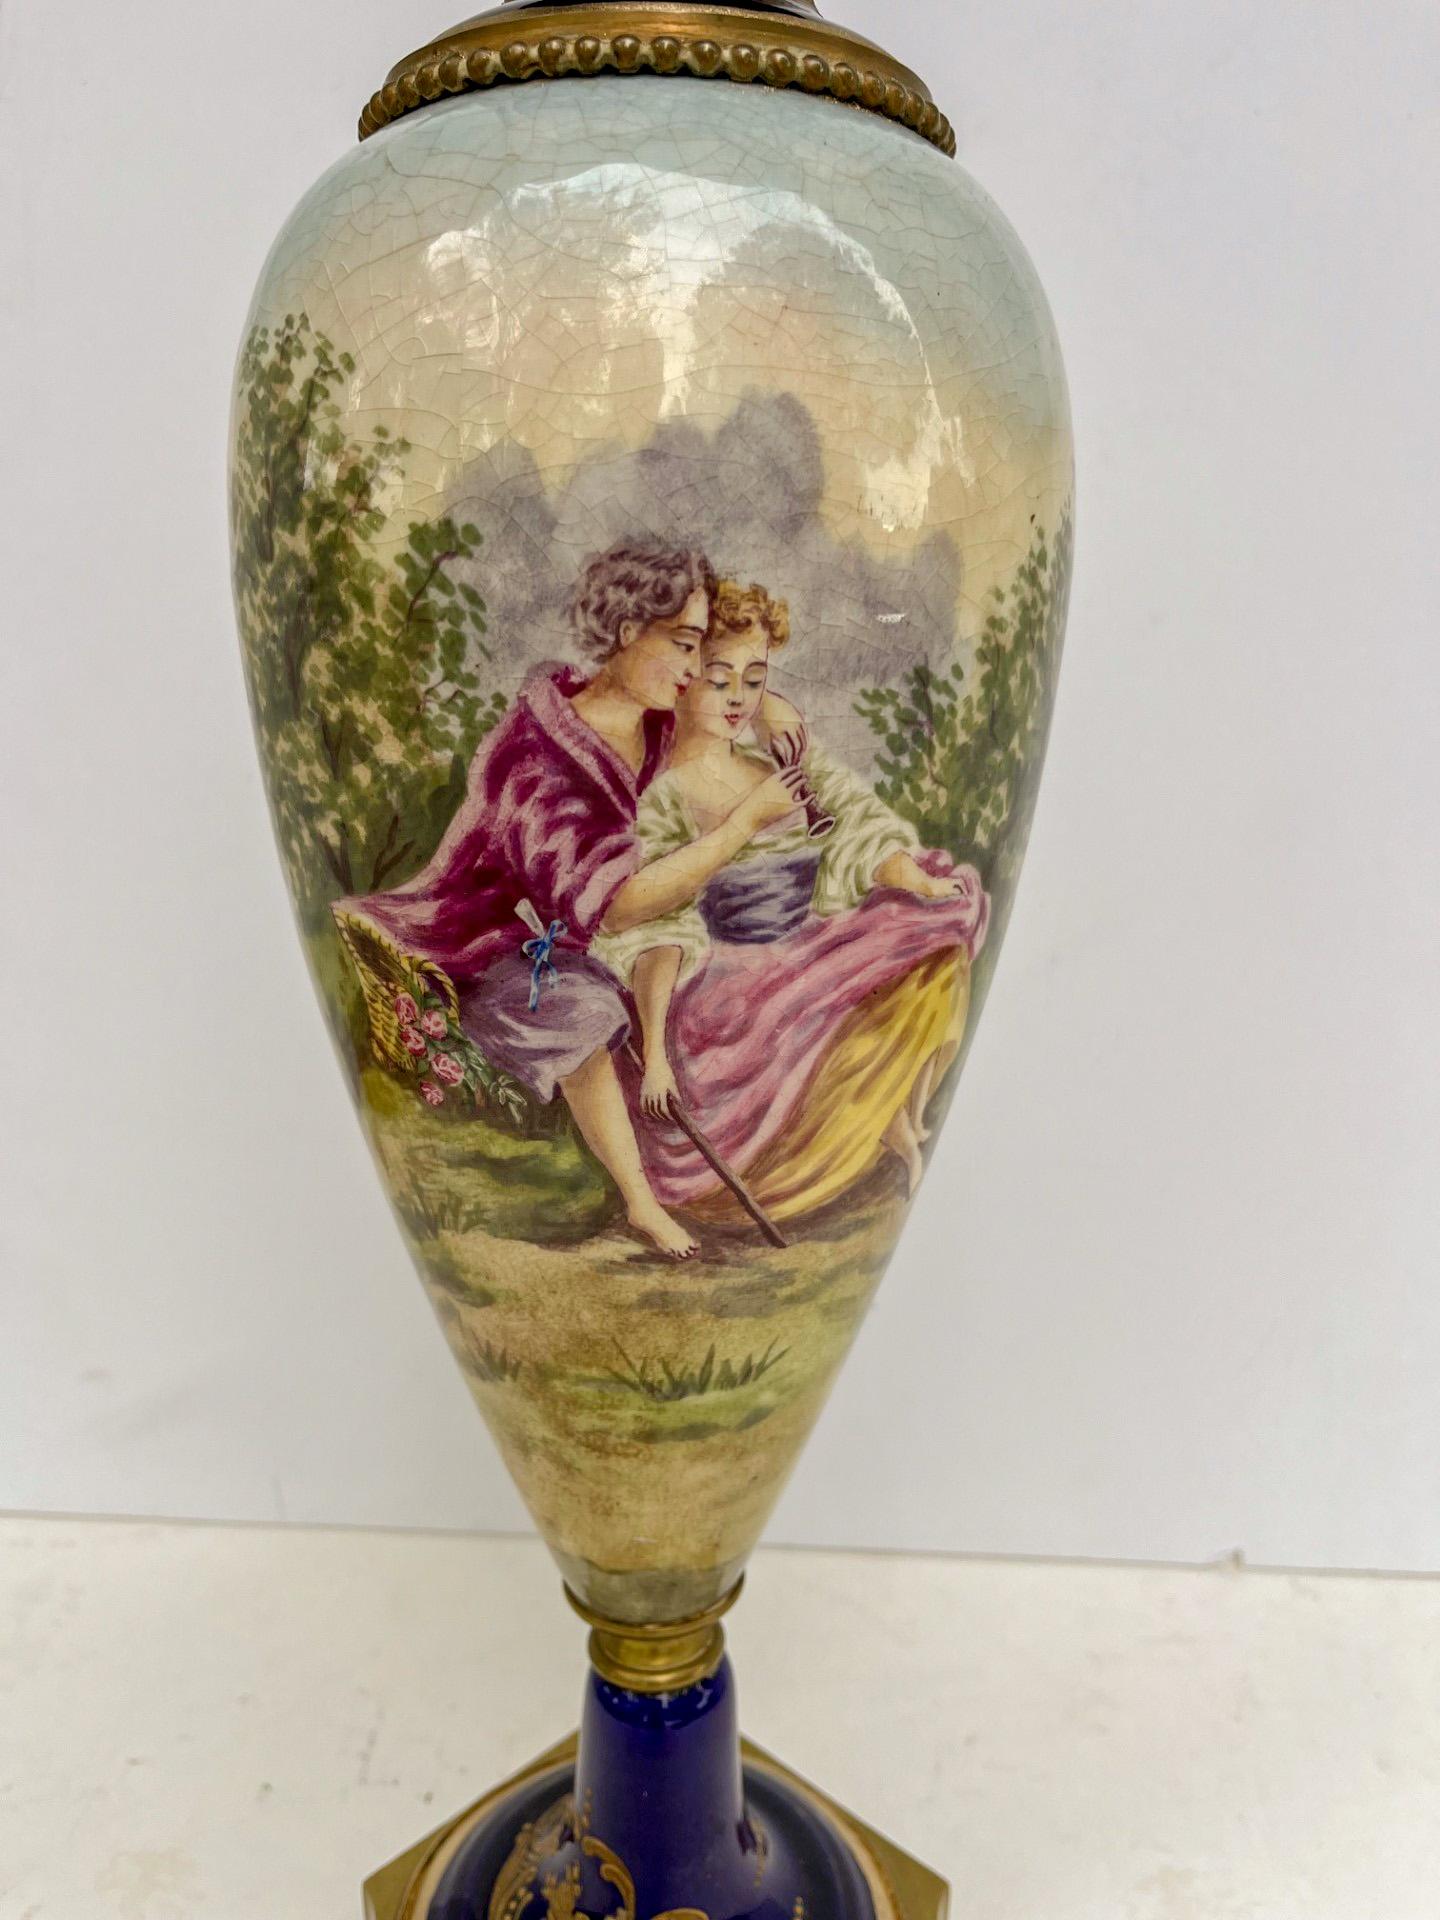 French 19th Century Napoleon III Sevres Style Porcelain Vase

Beautiful lidded Sevres style vase with ormolu mounts in the manner of the famous French porcelain manufactory. Elegant and slender baluster form. The domed lid has a pineapple finial.